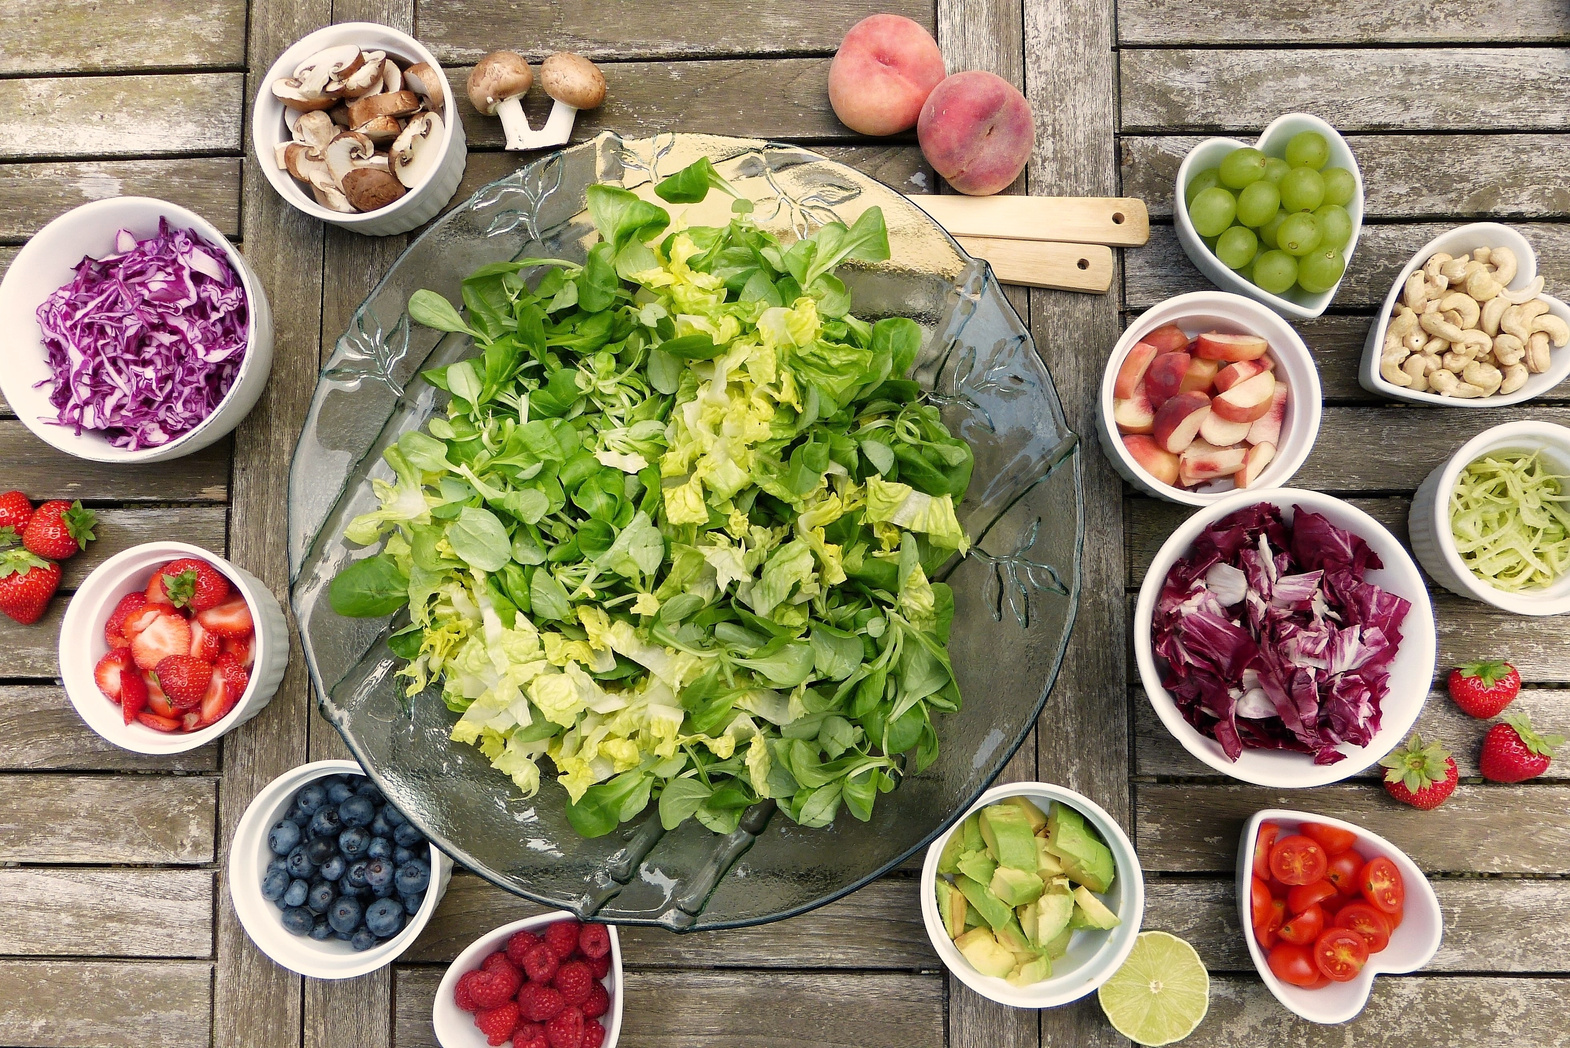 Top View of Green Salad and Fruits